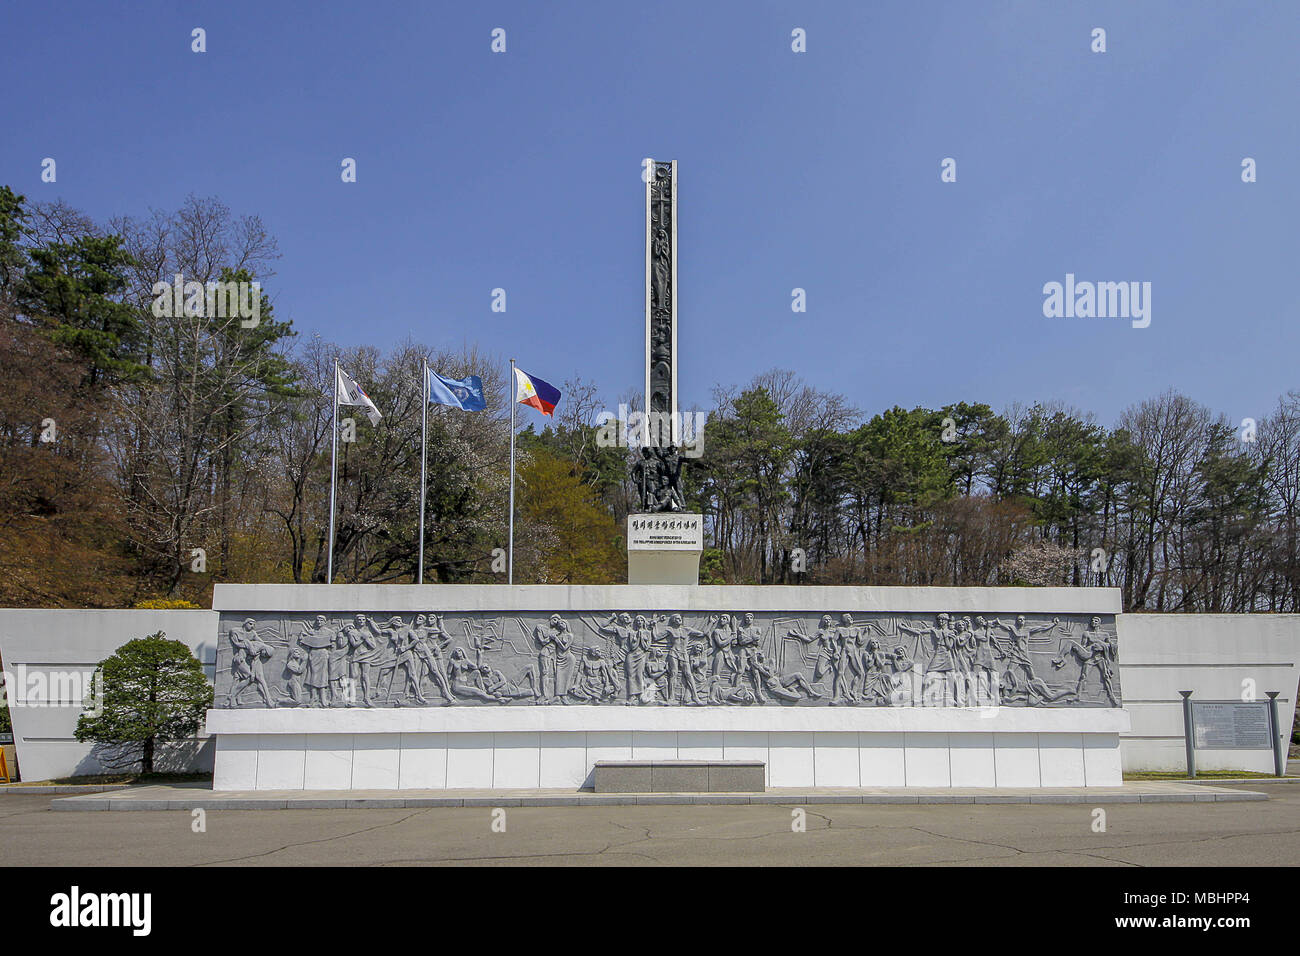 April 11, 2018 - Goyang, GYEONGGI, SOUTH KOREA - April 11, 2018-Goyang, South Korea-A View of Korean war Philippines Army monument memories. On September 19, 1950. shortly after the Korean war began with a surprise attack on the South by the Communist North, the Philippines dispatched it's soldiers to take part in the United Nation Forces. The 1.496 strong Philippines contingent thought courageously and successfully in the Battles of Waegwan, Gimcheon, Daegu, Cheorwon, anf the Imjin River. They suffered 92 dead, 293 wounded and 57 missing in action. (Credit Image: © Ryu Seung-Il via ZUMA Wire) Stock Photo